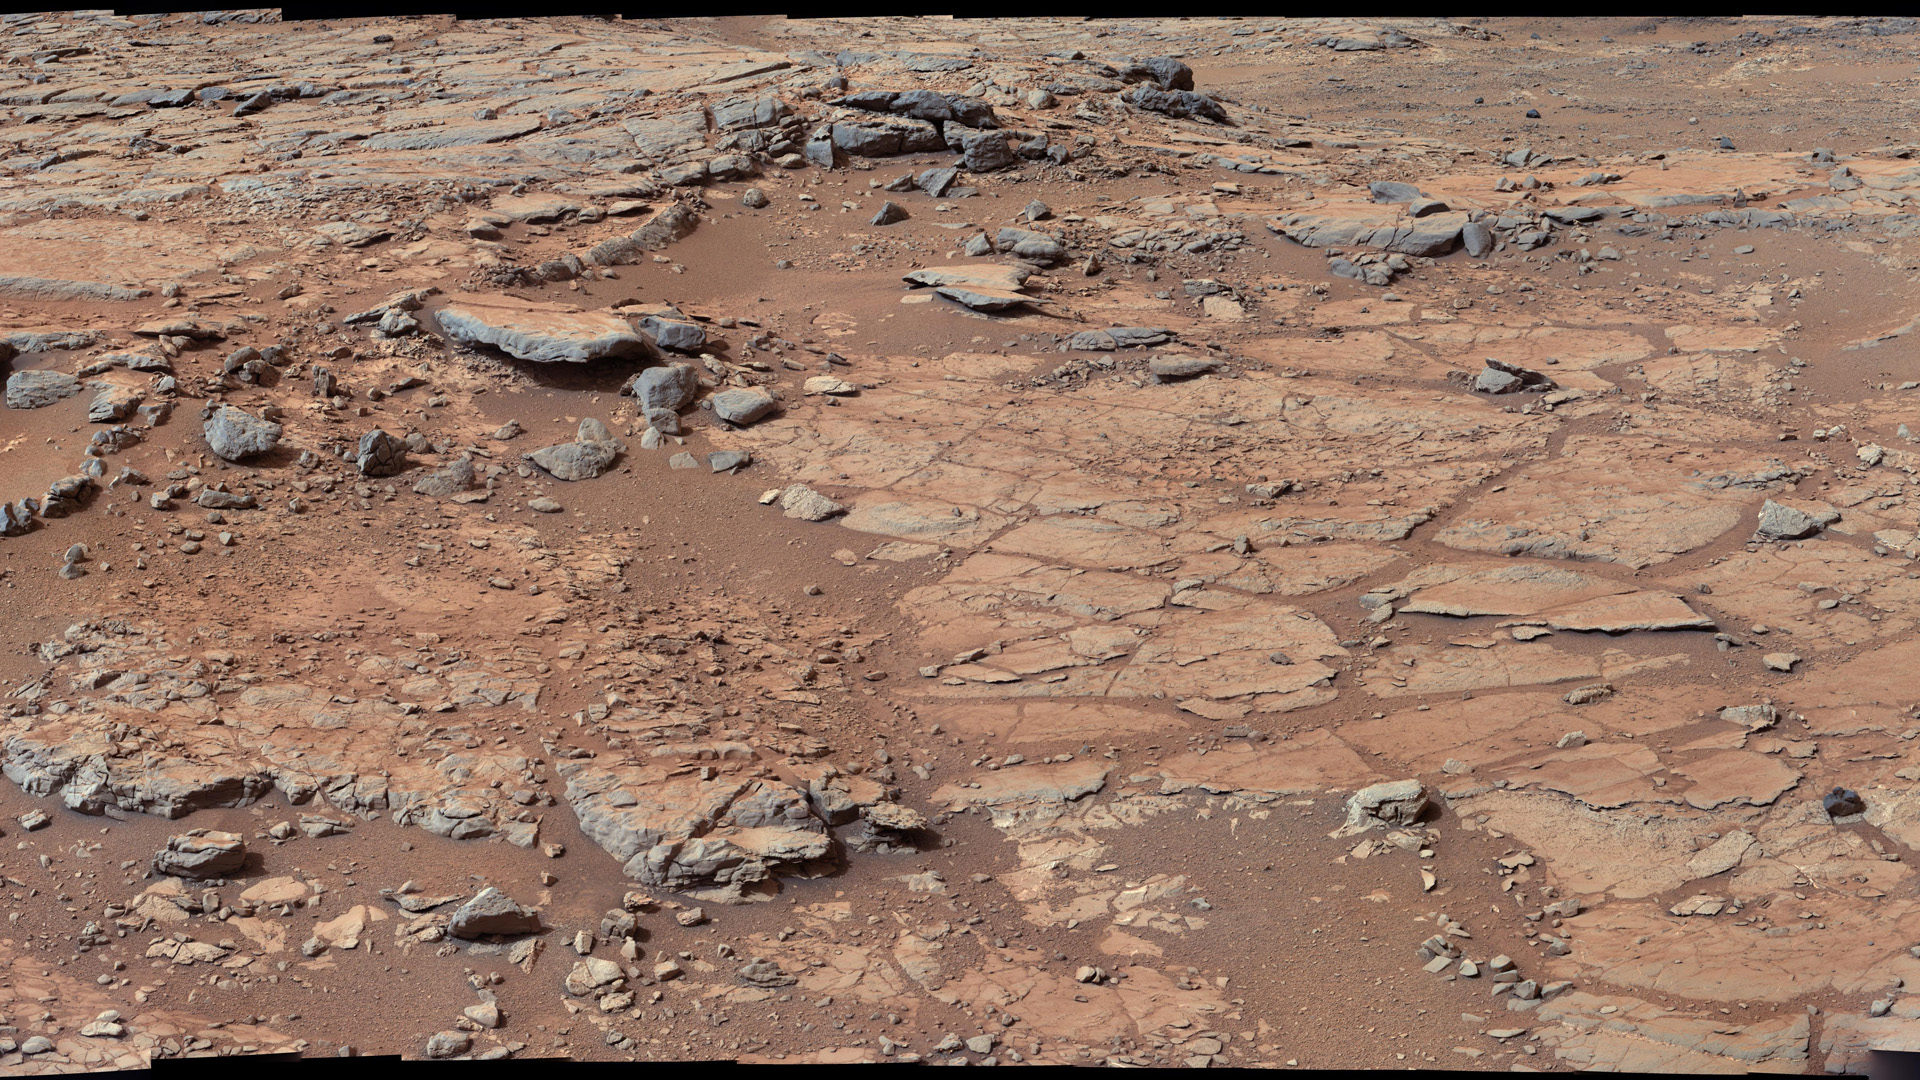 NASA's Mars rover Curiosity collected rock samples from the Yellowknife Bay formation of Gale crater.